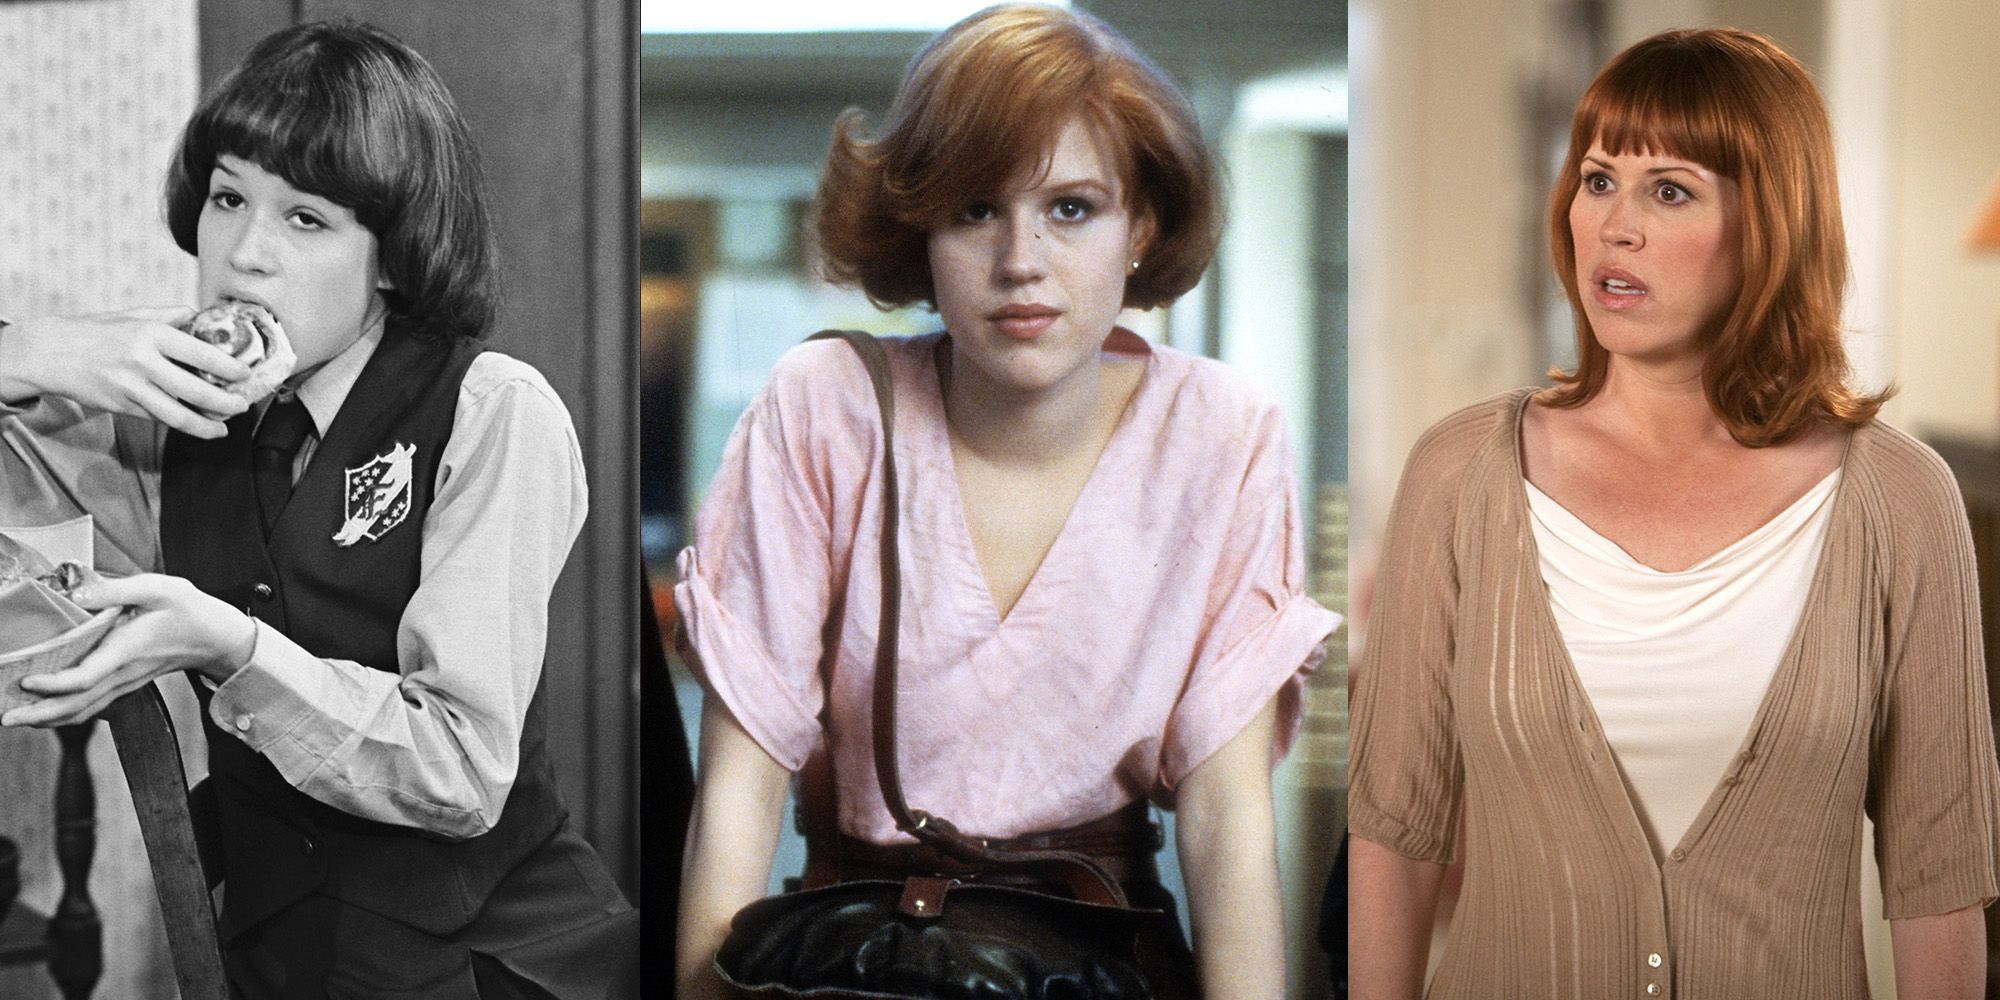 Molly Ringwald's Iconic Career in Photos -- 40 Photos of Molly Rindwald's Career